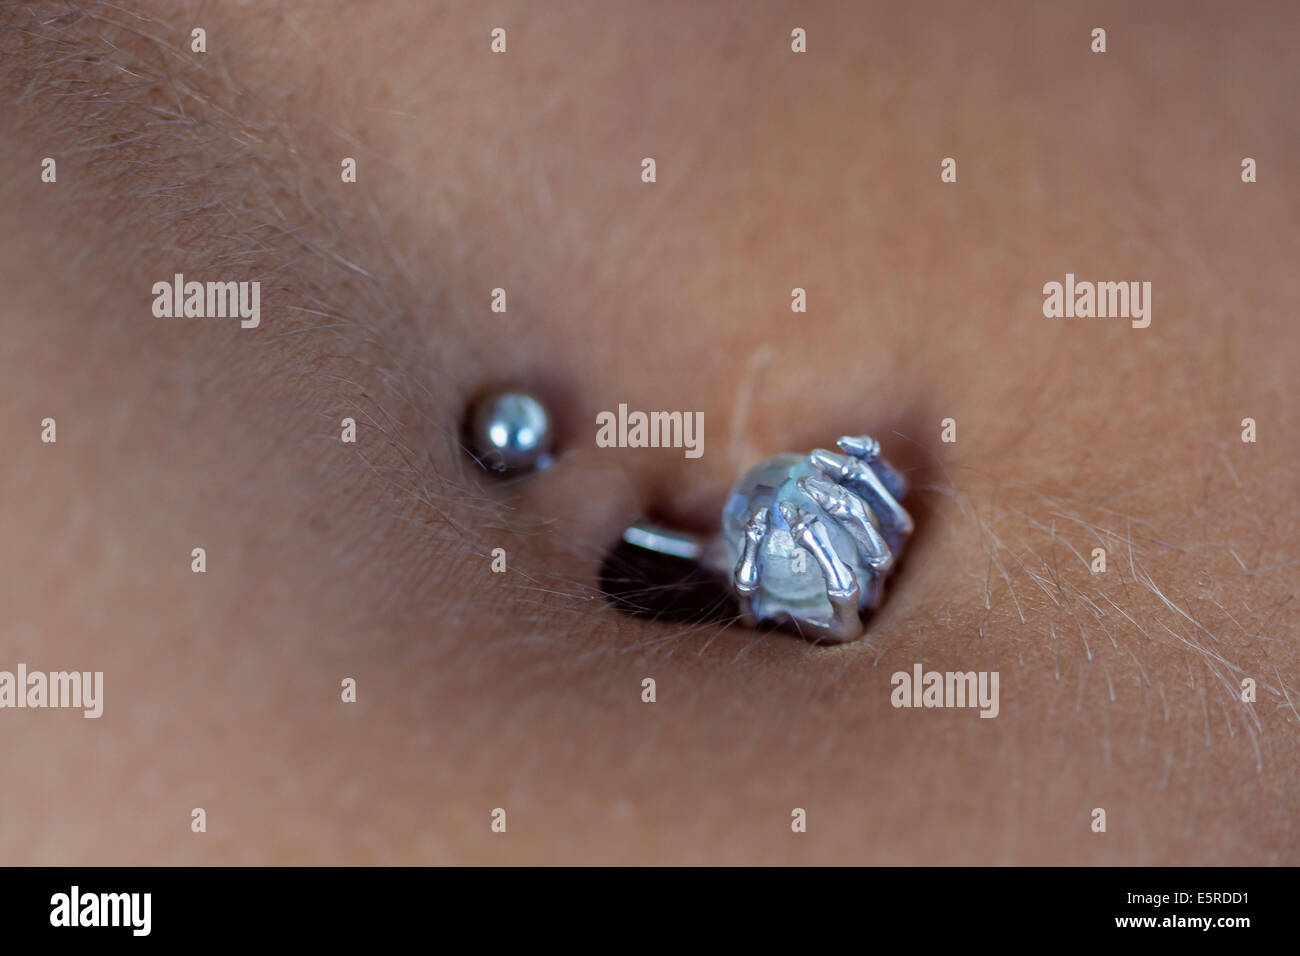 Close-up of a pierced navel. Stock Photo